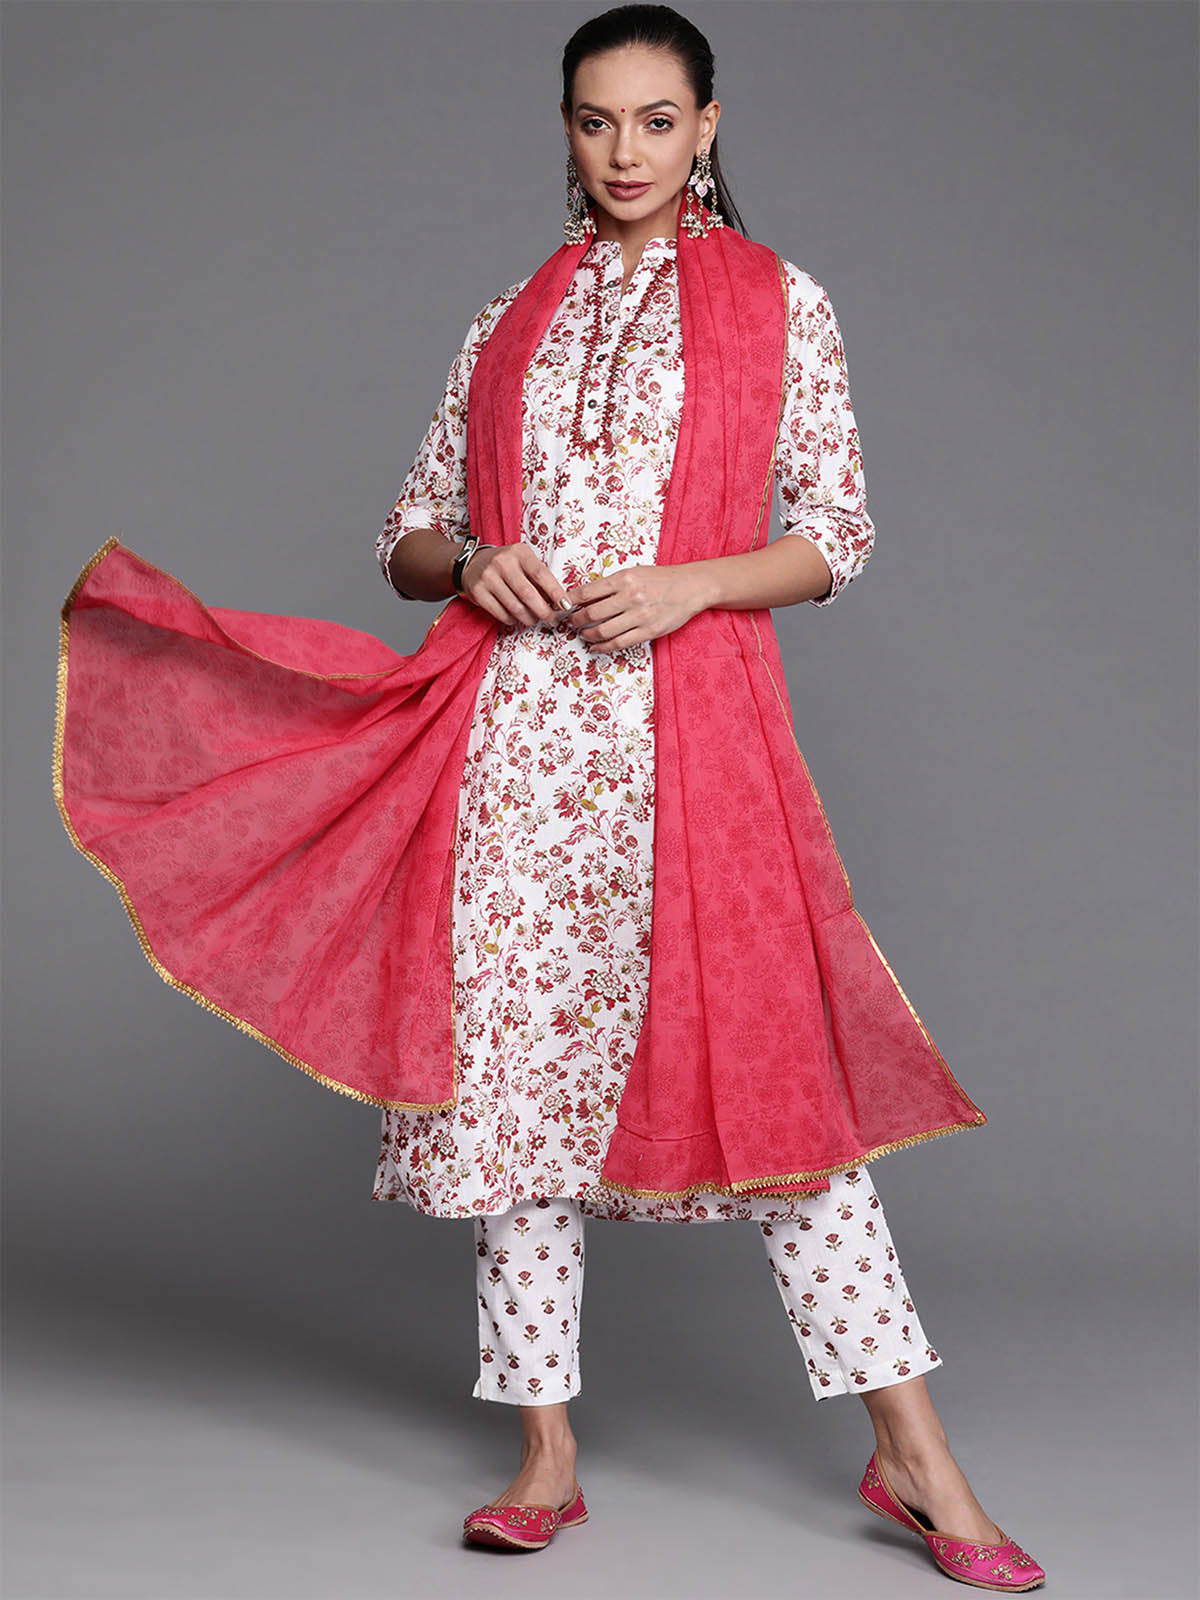 Women's Red Floral Printed Straight Kurta Trouser With Dupatta Set - Odette